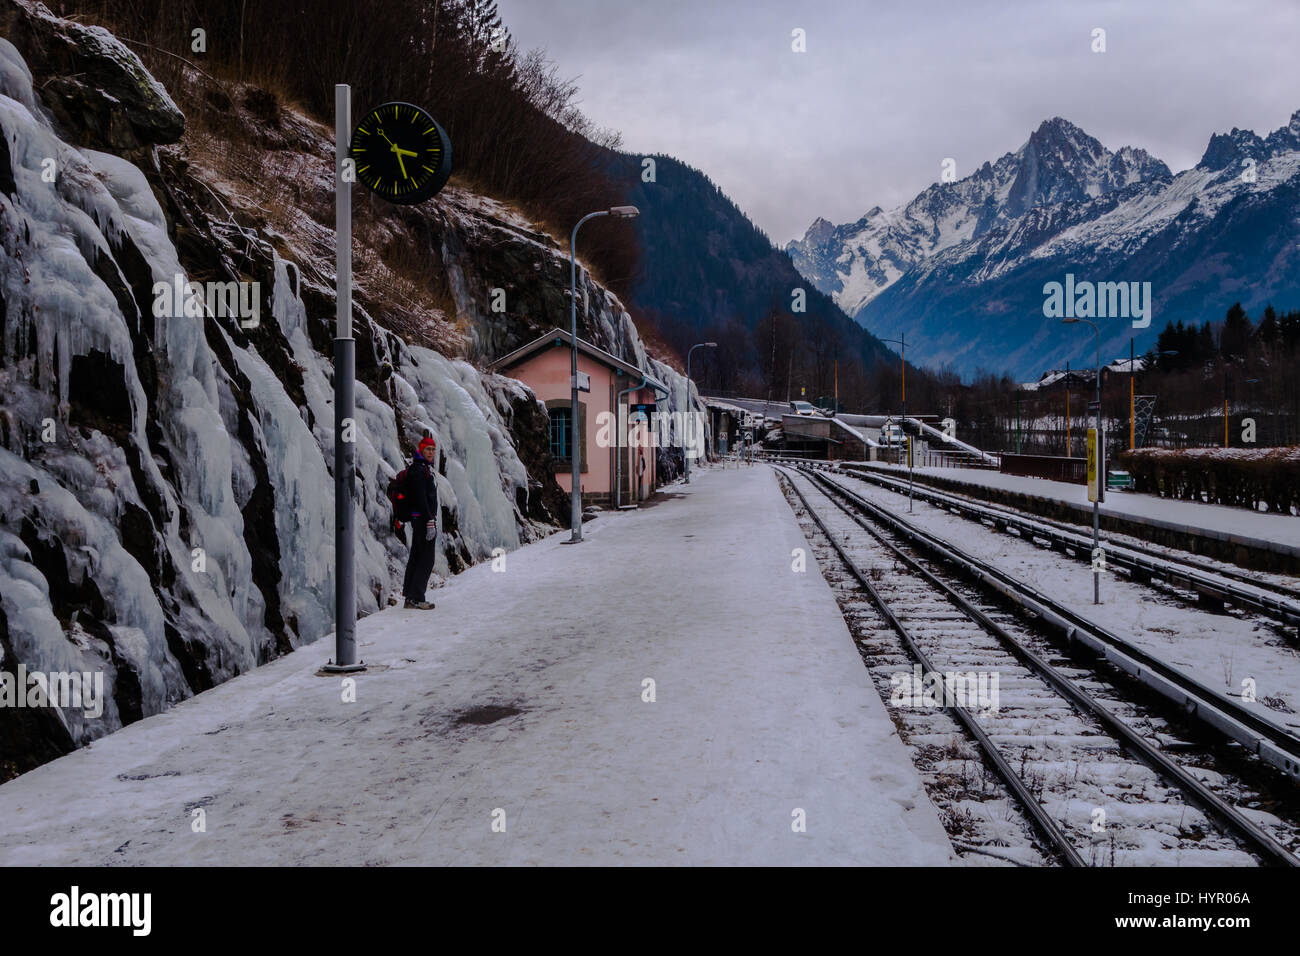 Chamonix, France - January 2, 2017: Traveller waiting in cold weather on overcast day in mountain valley in Alps in winter Stock Photo